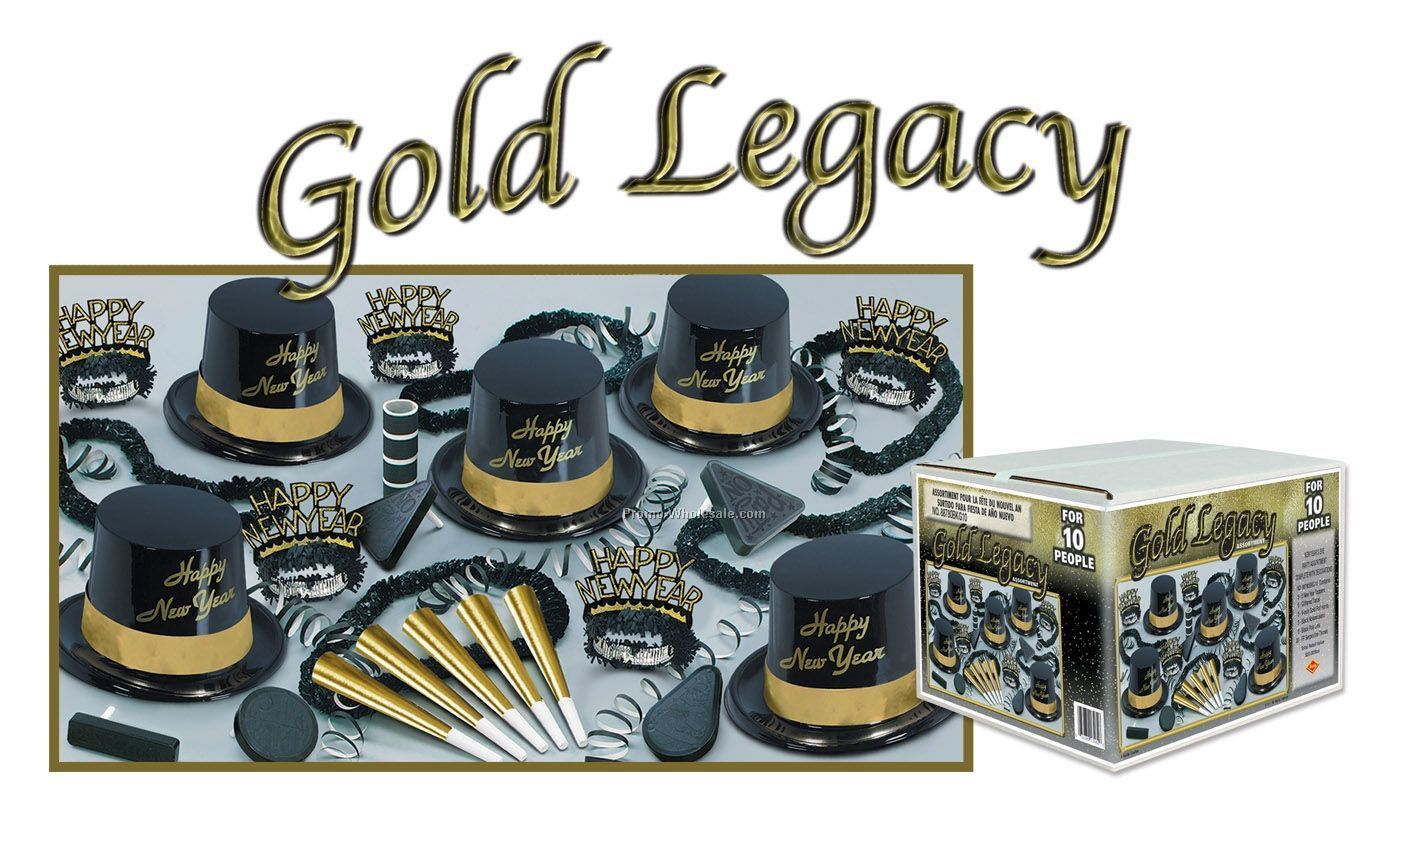 Gold Legacy Assortment For 10 W/ Retail Price Label